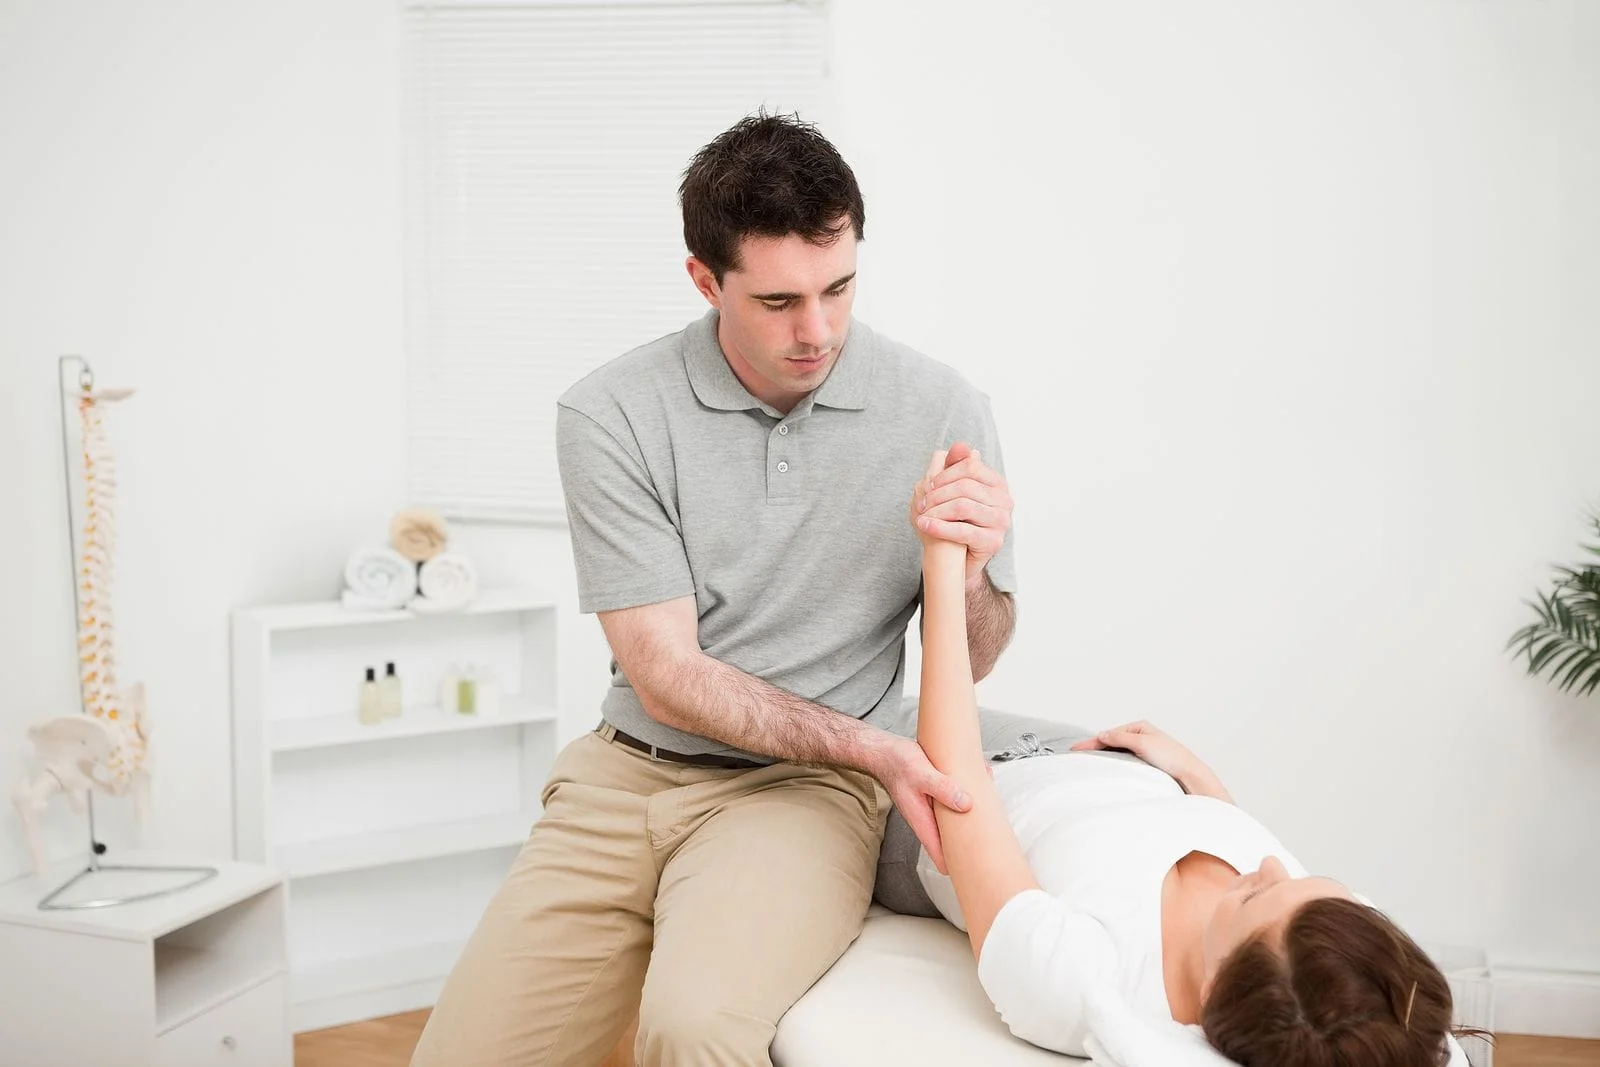 chiropractor examining patient and giving her chiropractic care